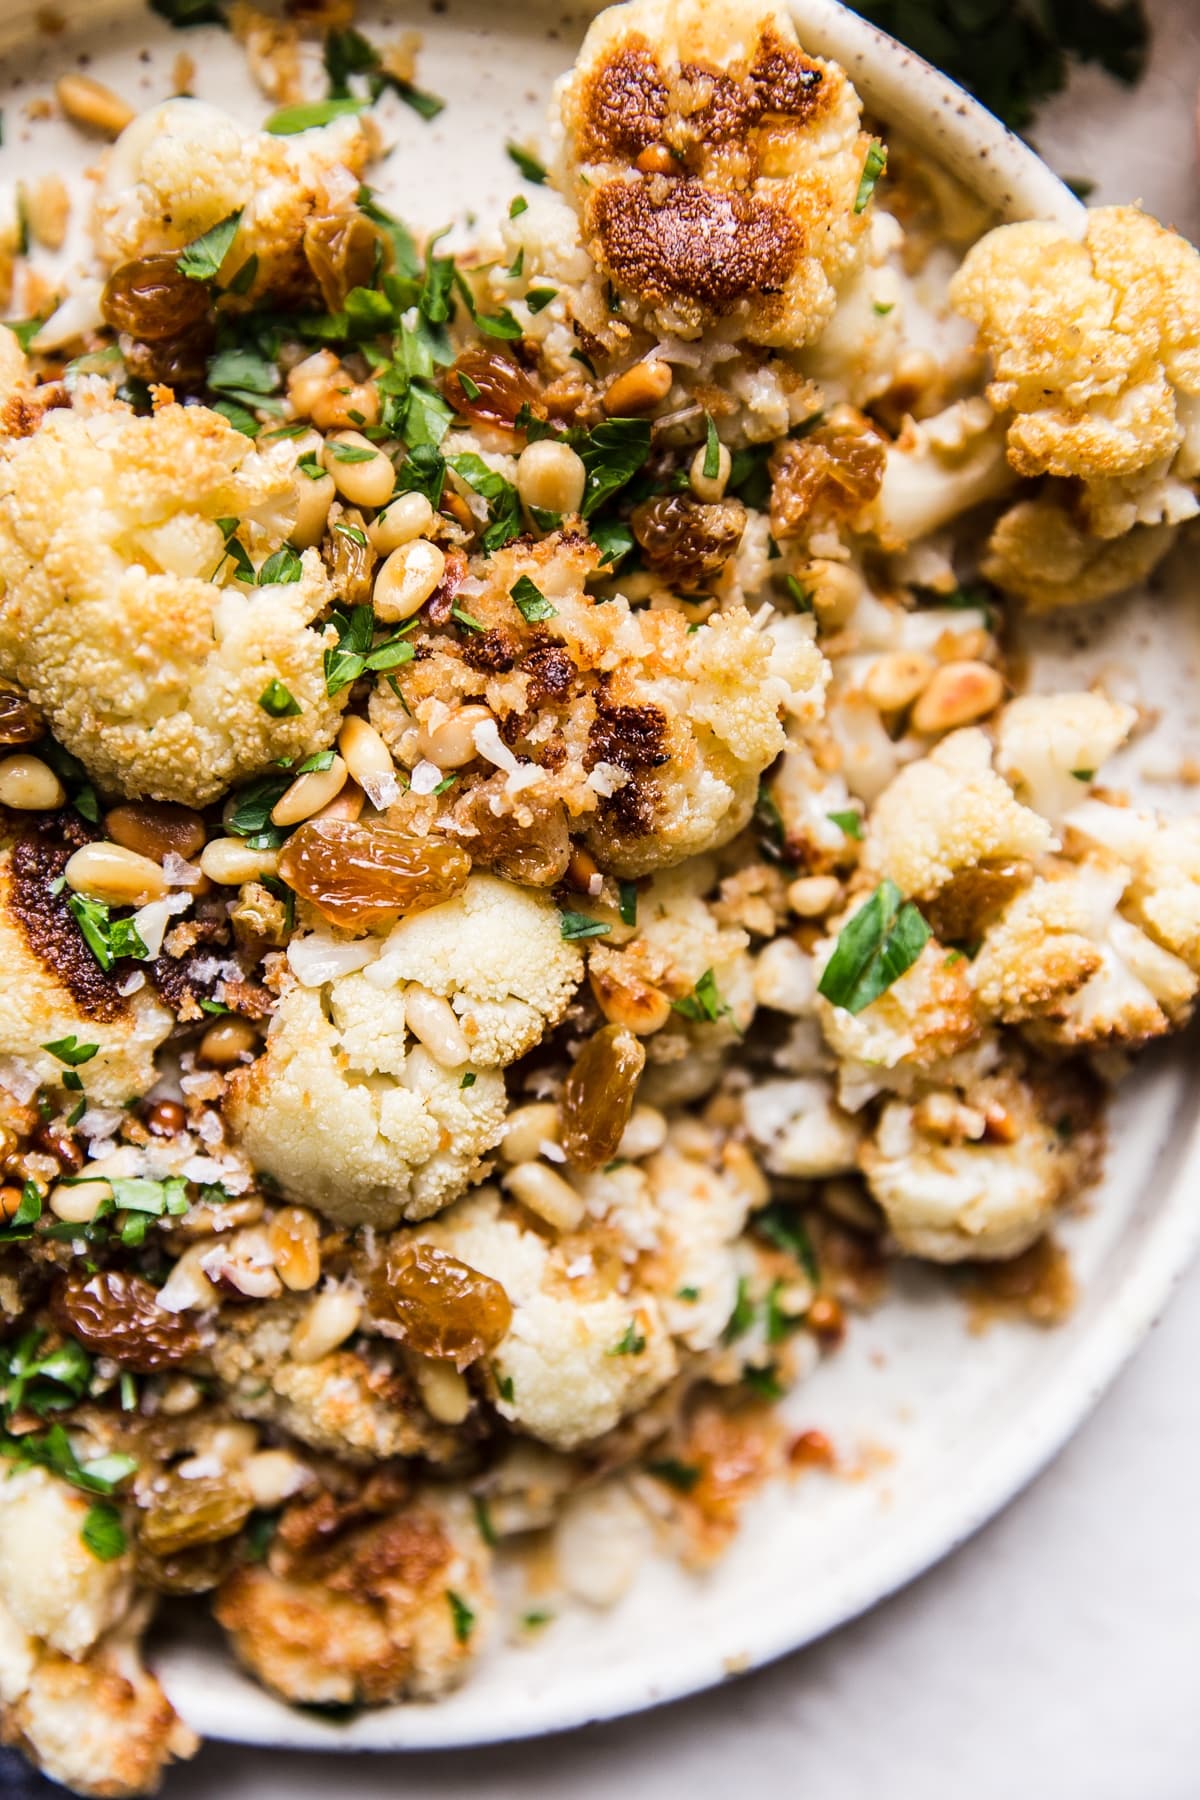 Roasted Cauliflower with Panko and golden raisins on a plate